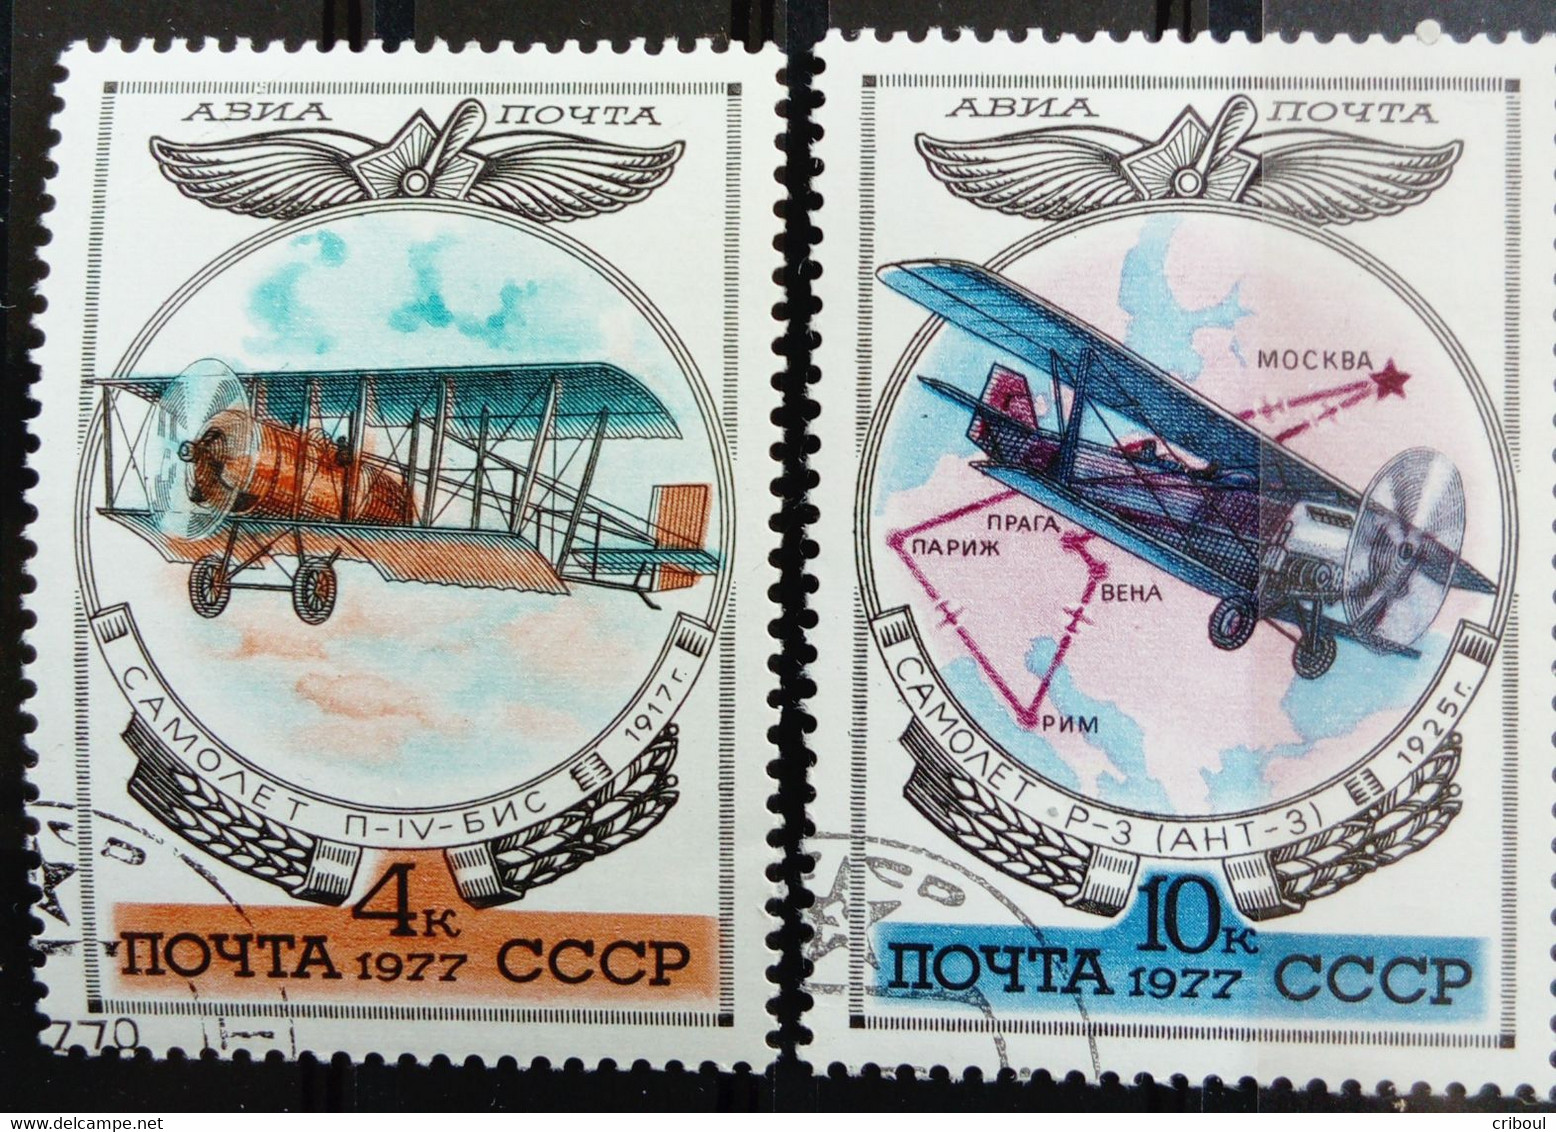 Russie Russia URSS USSR 1977 Avion Airplane Yvert PA124 126 O Used - Used Stamps